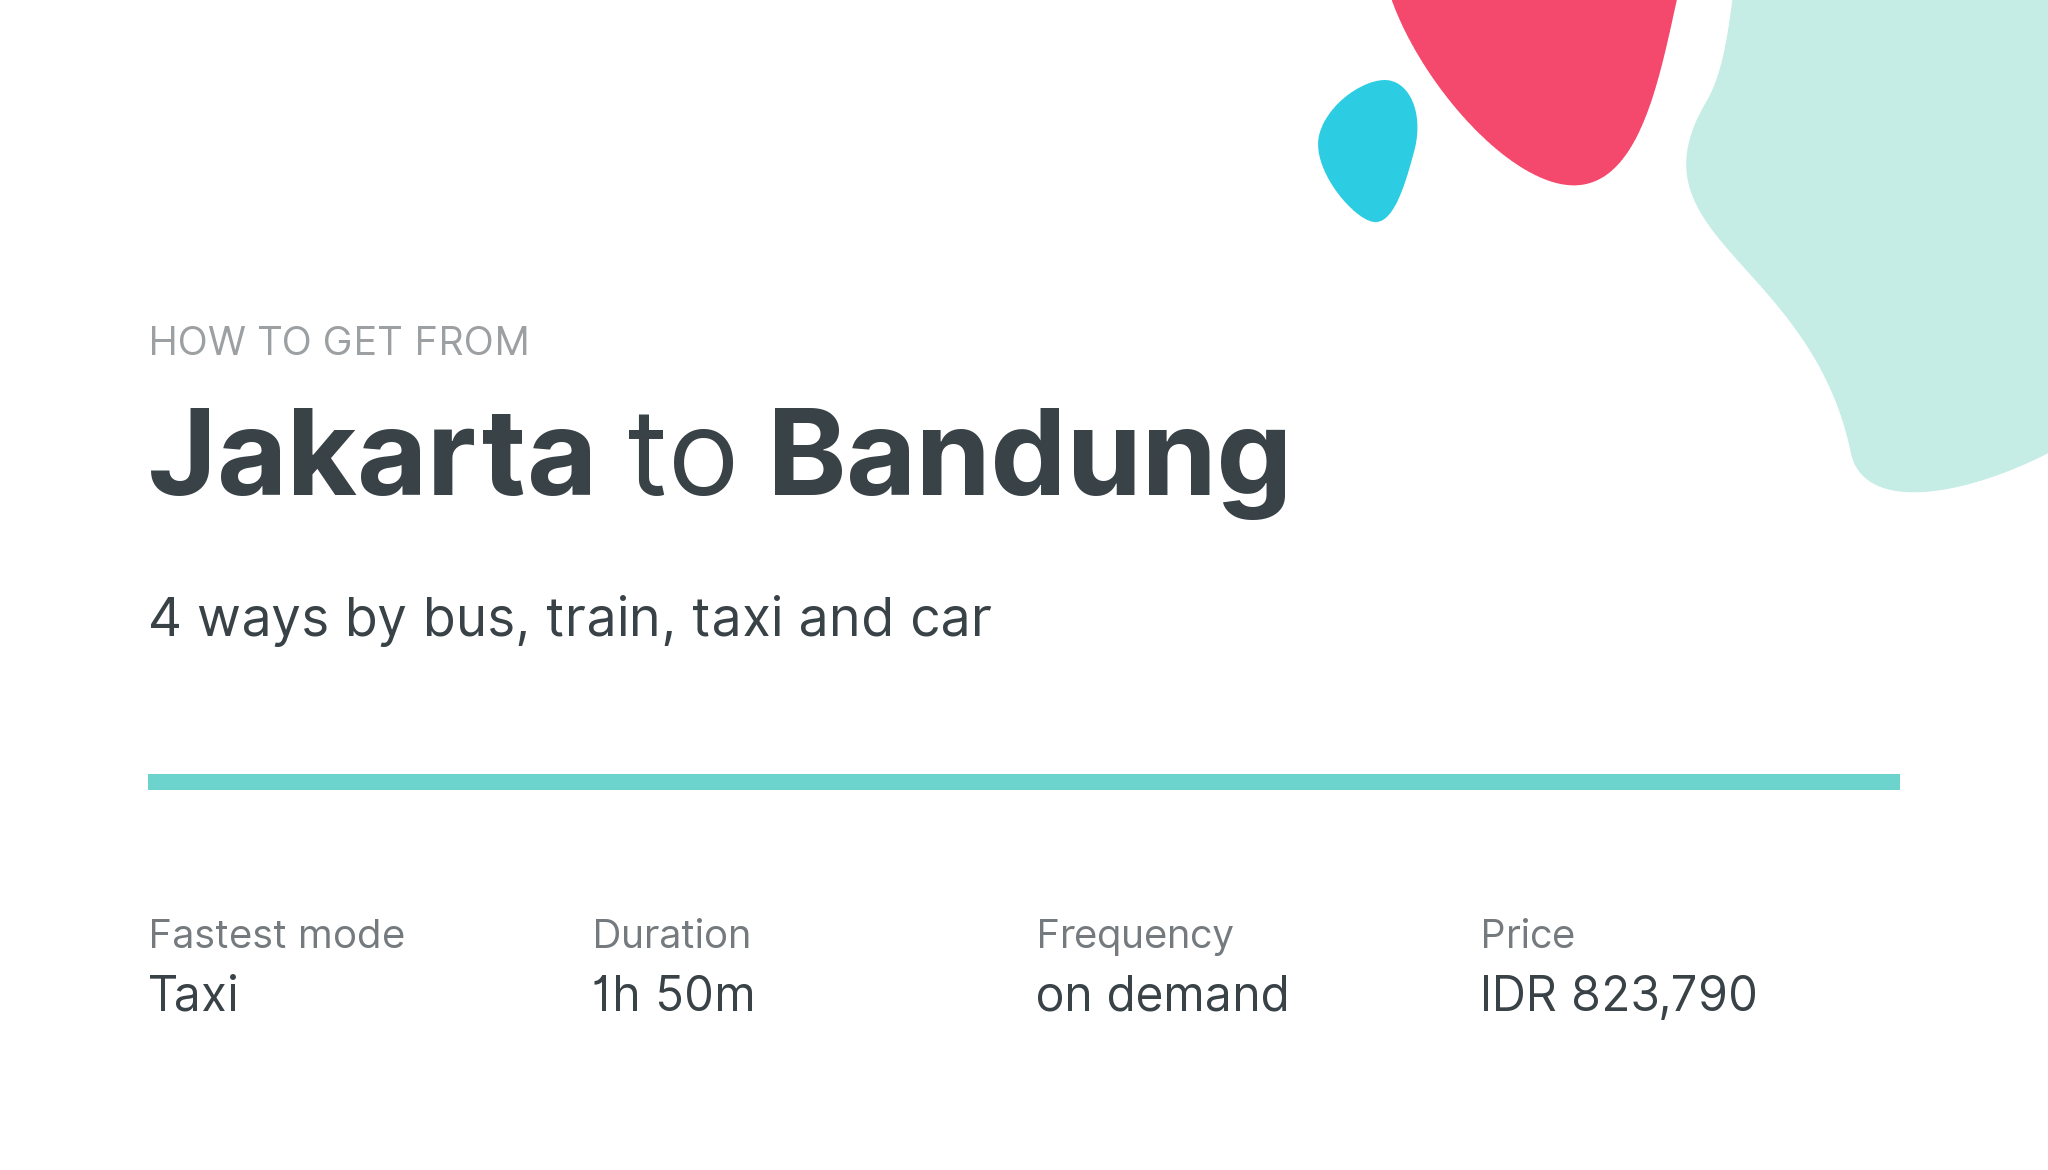 How do I get from Jakarta to Bandung